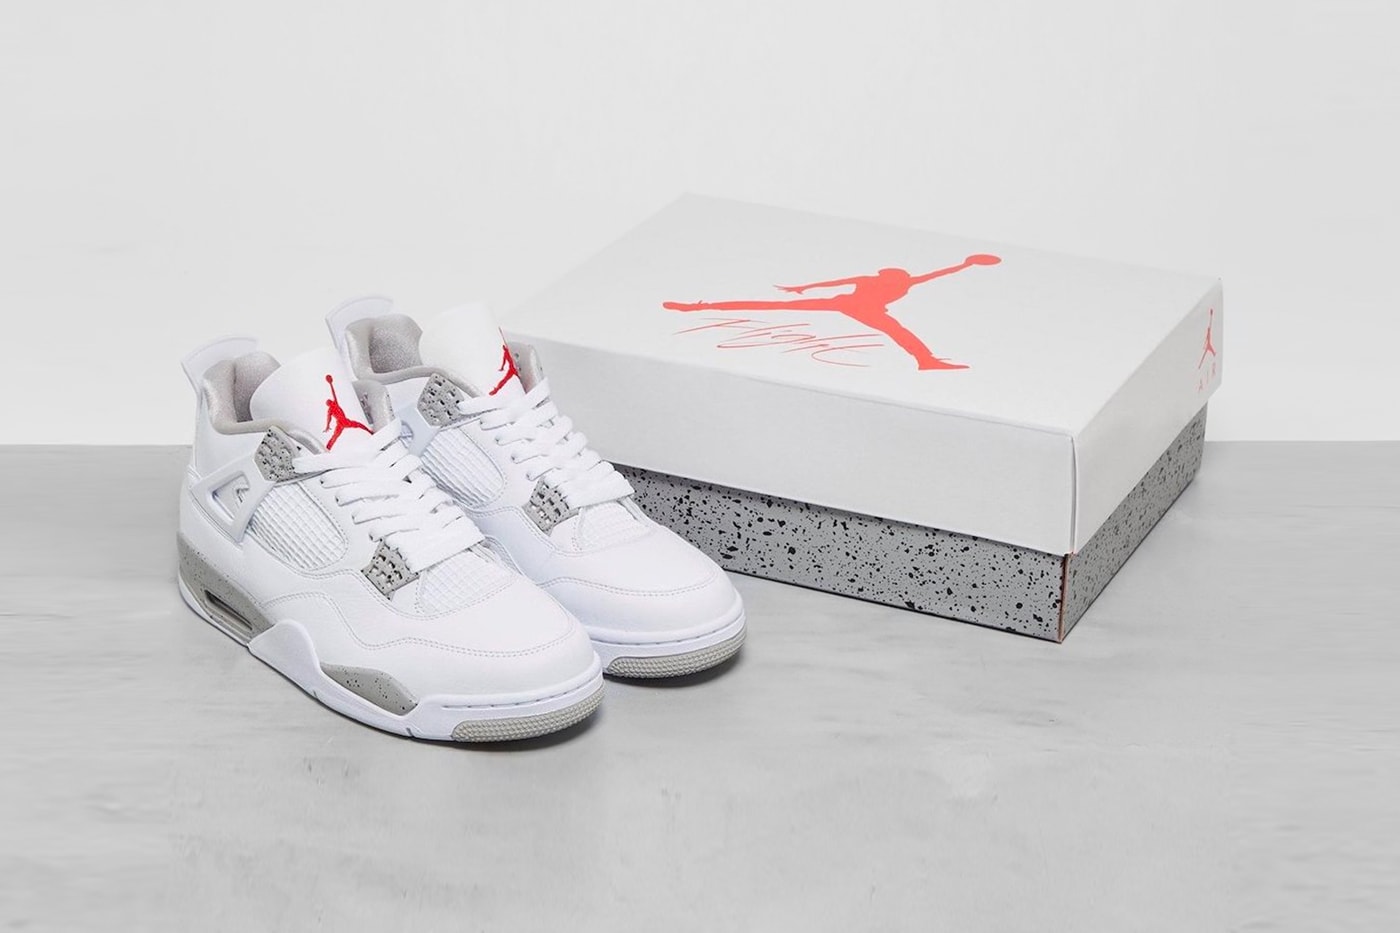 Air Jordan 4 White Oreo Another Look Shoebox Release Info ct8527-100 Buy Price Date 